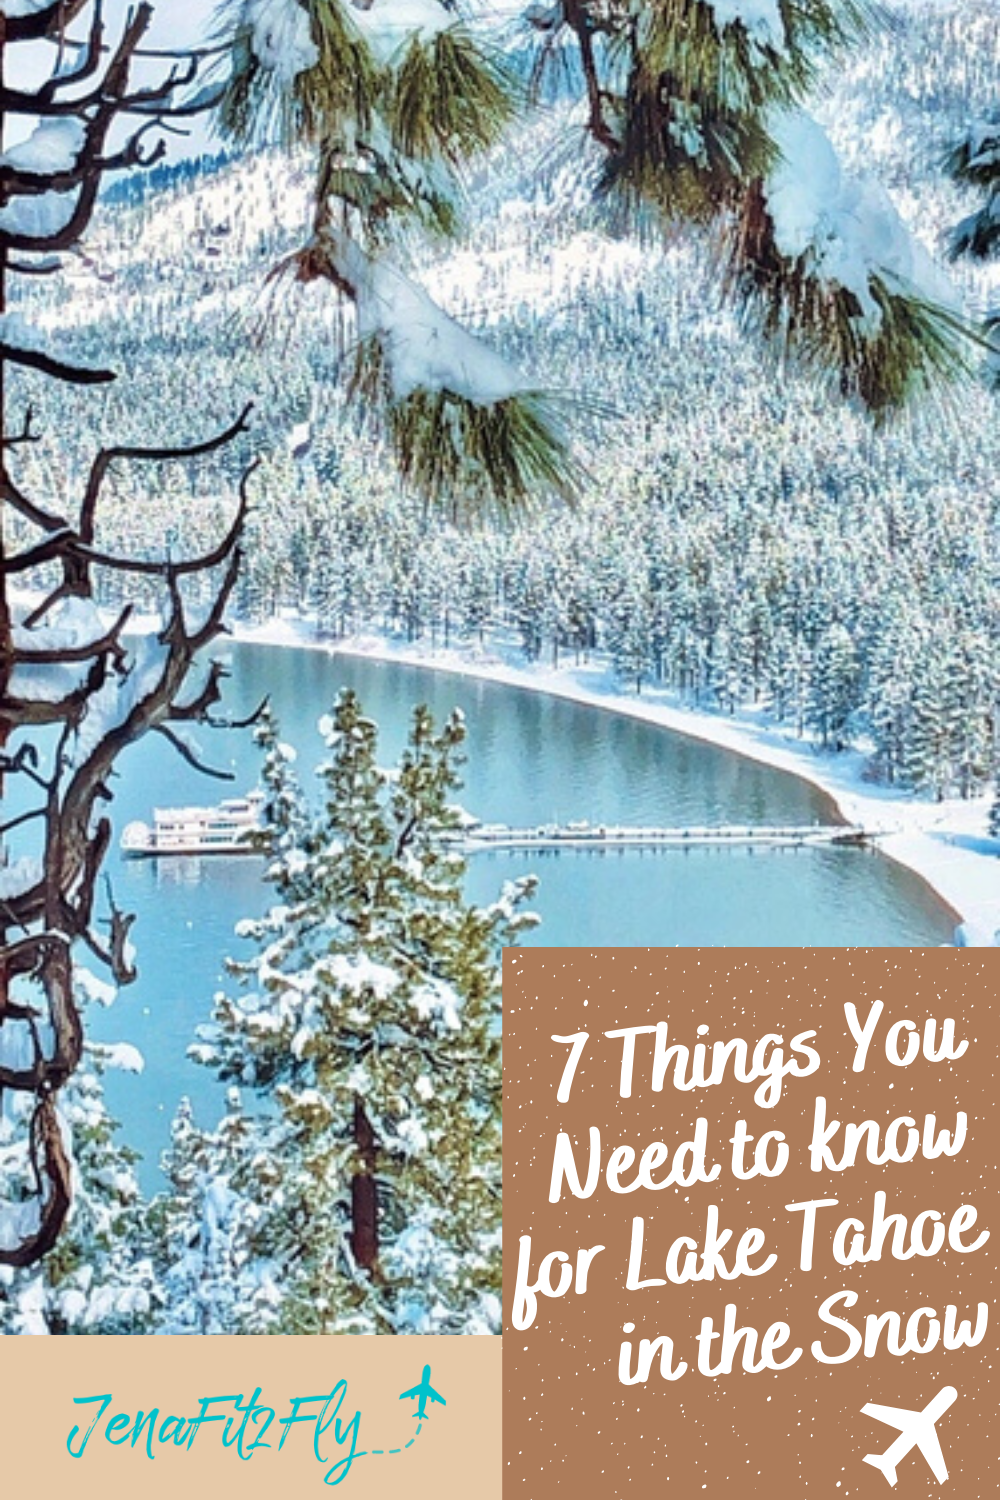 The 7 things you need to know for Lake Tahoe in the snow! Lake Tahoe is absolutely unreal at any time of year, but there is something so incredible about it completely covered in snow! Here are the 7 things you need to know for Lake Tahoe in the snow!